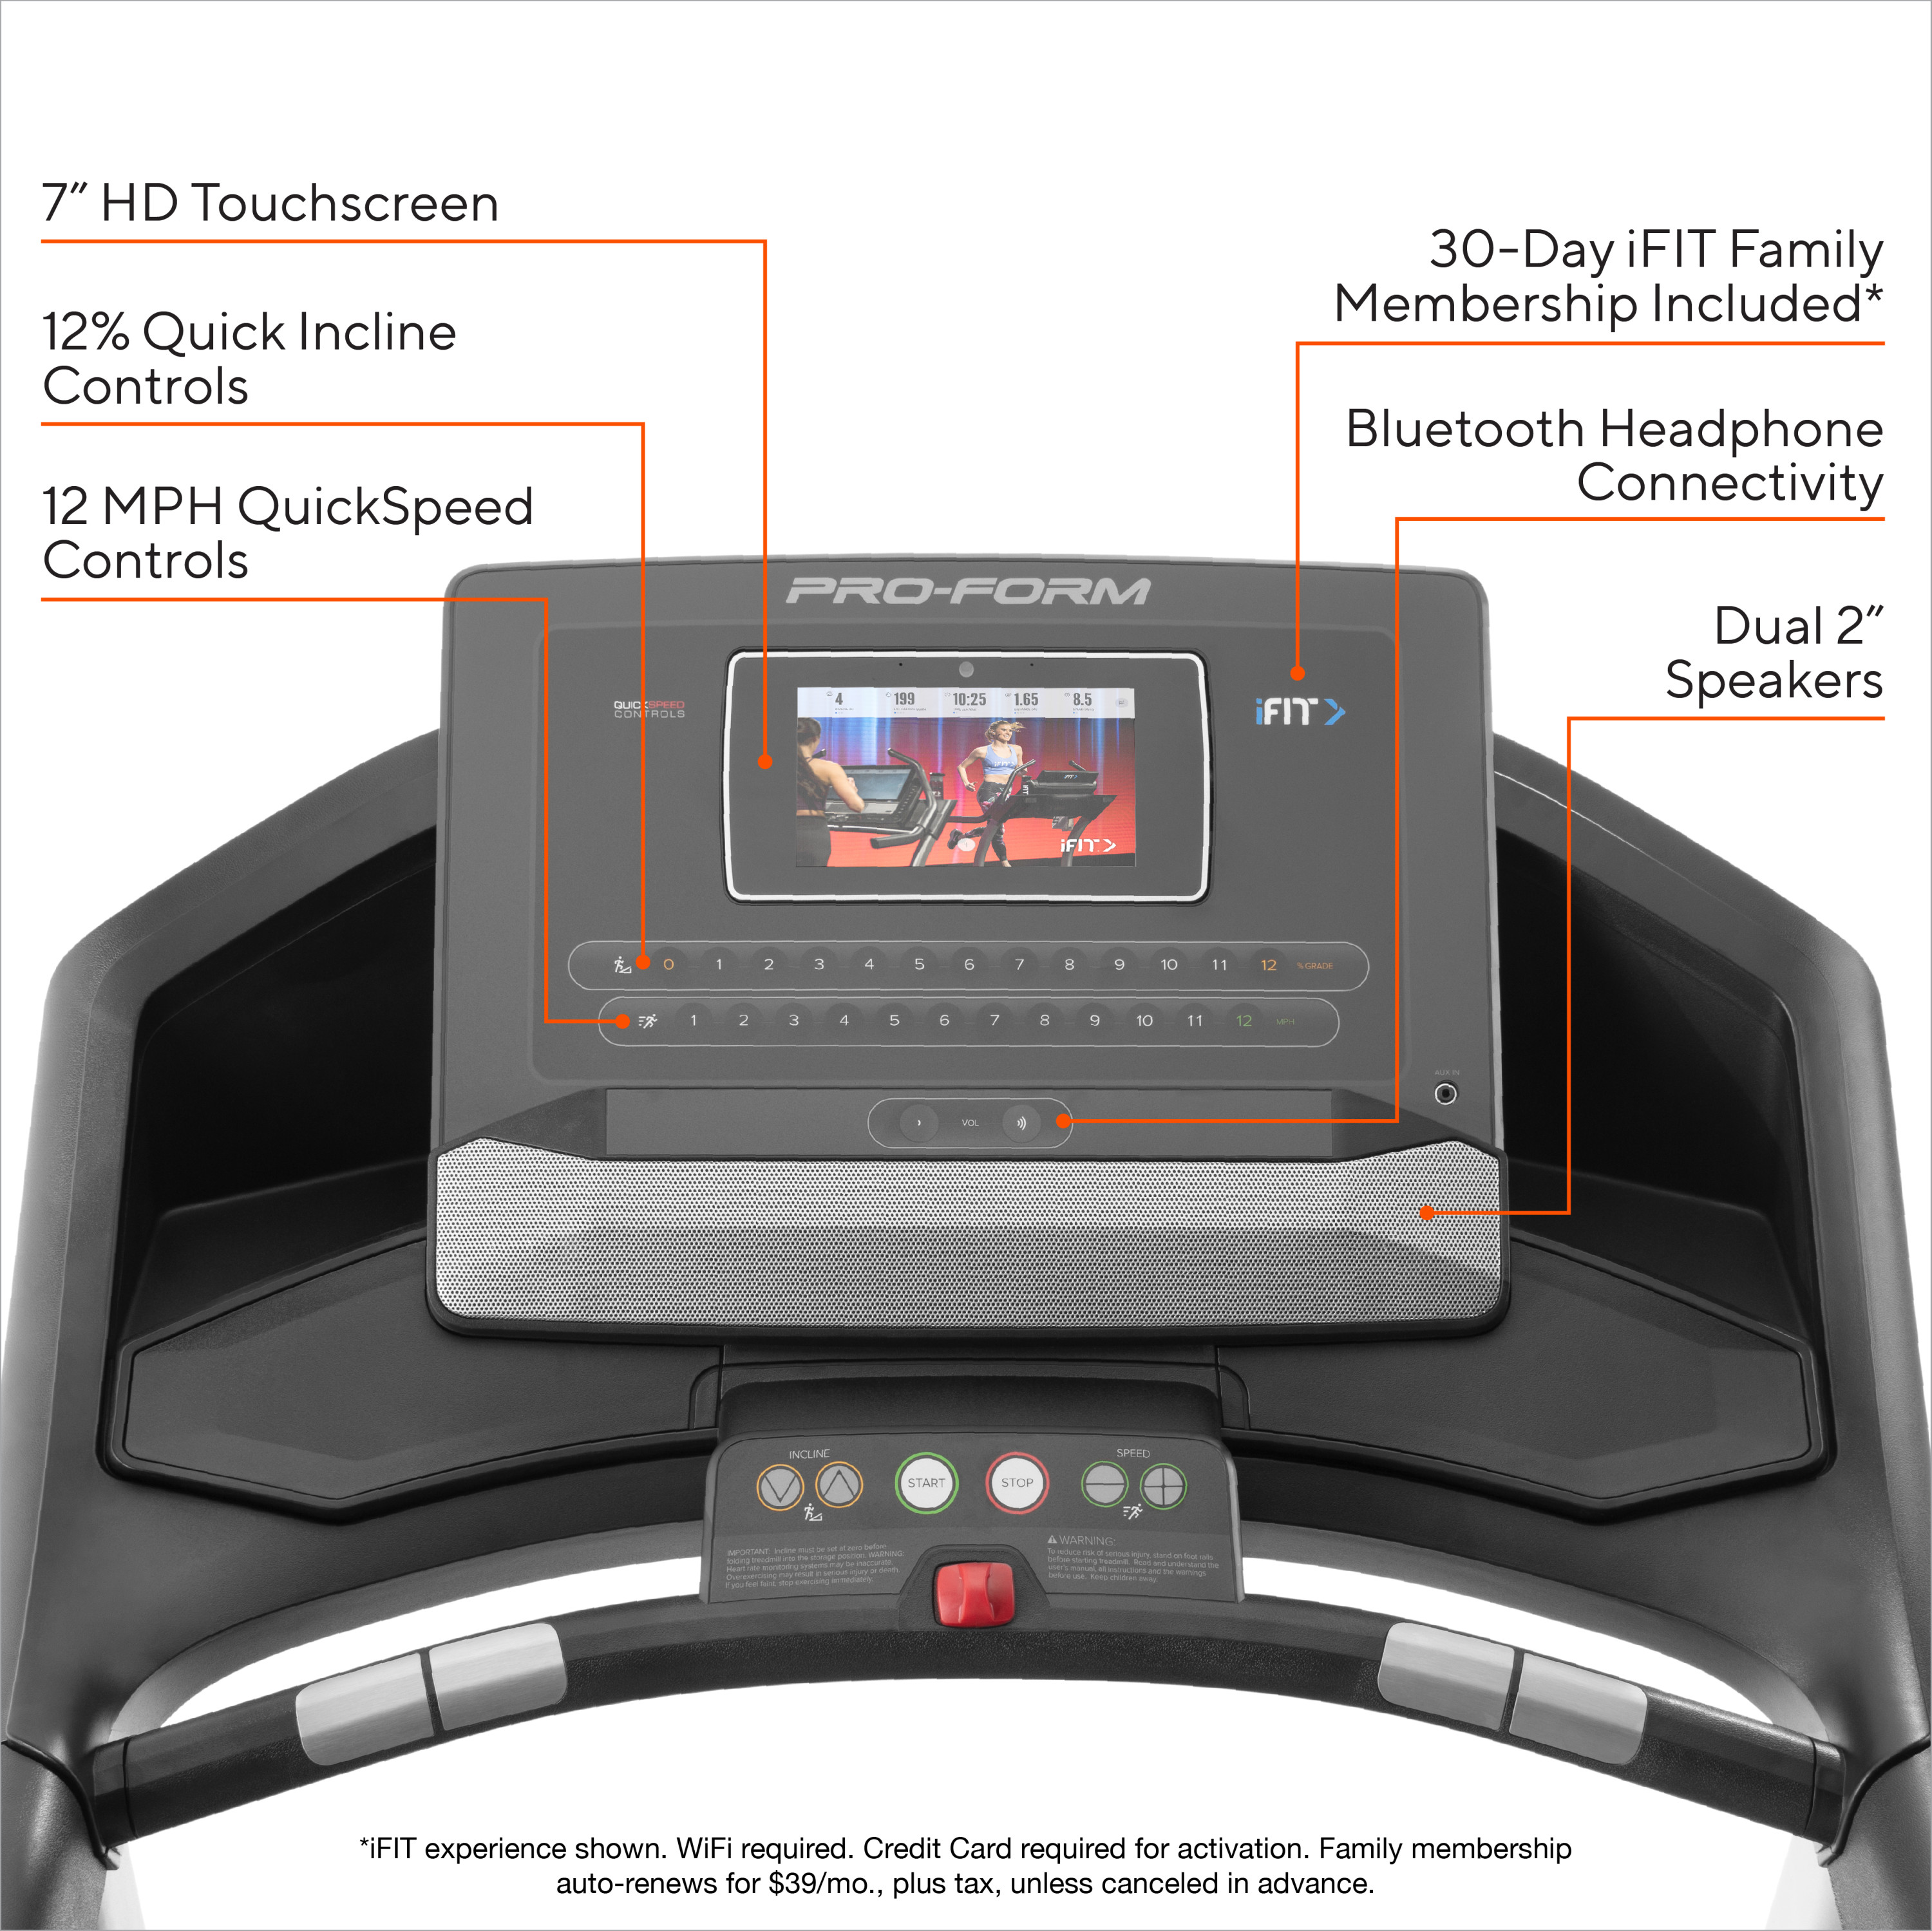 ProForm Trainer 10.0 Smart Treadmill with 7” HD Touchscreen and 30-Day iFIT Family Membership - image 4 of 12